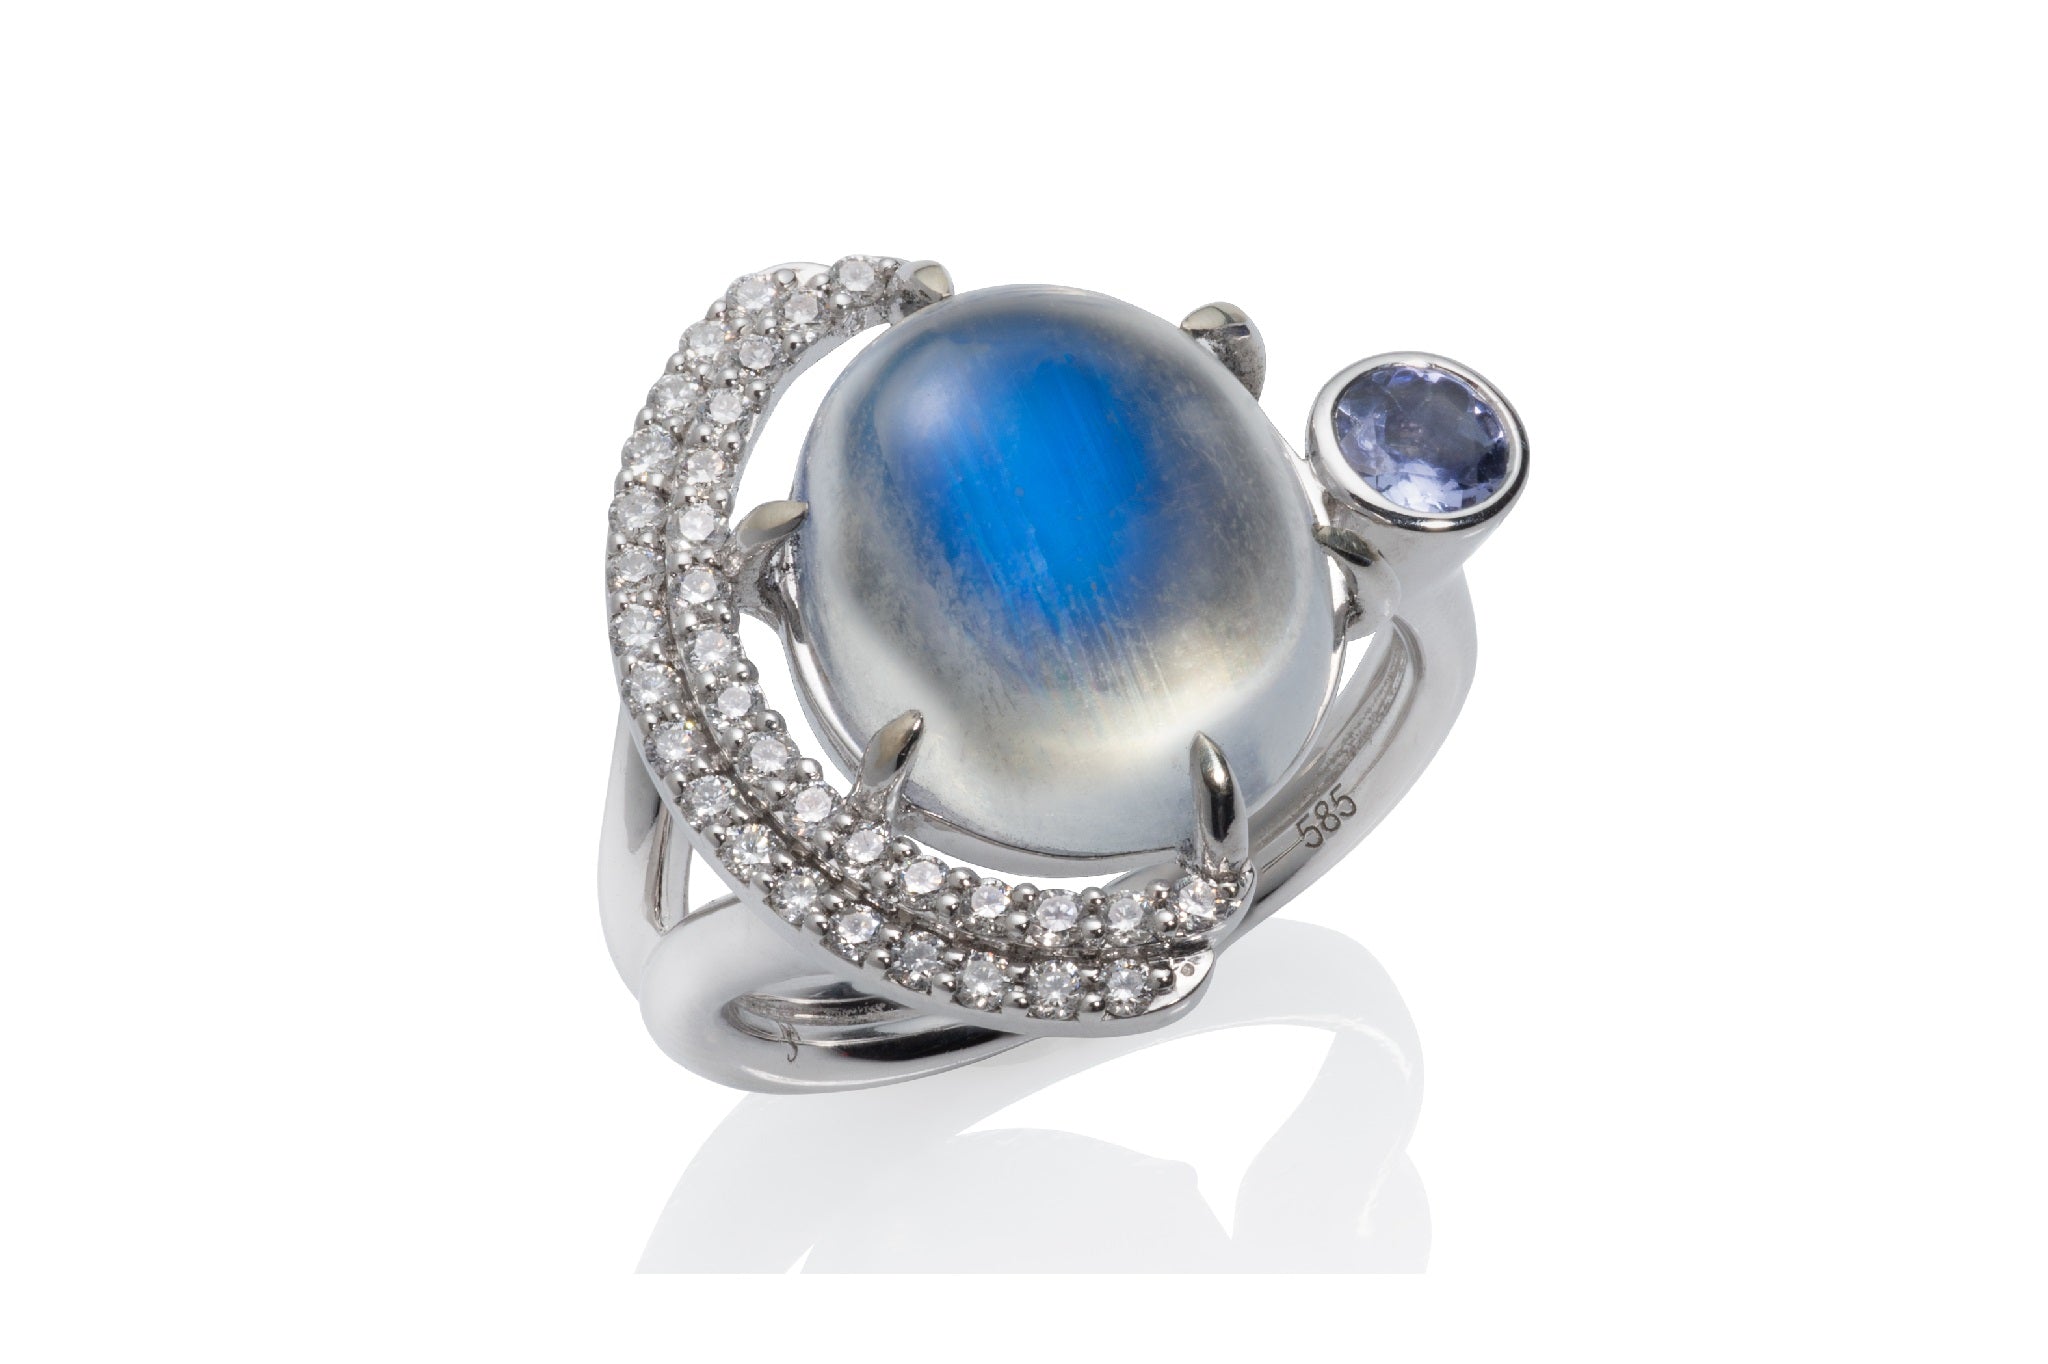 Blue Hour - Eclipse Ring with Blue Sheen Moonstone